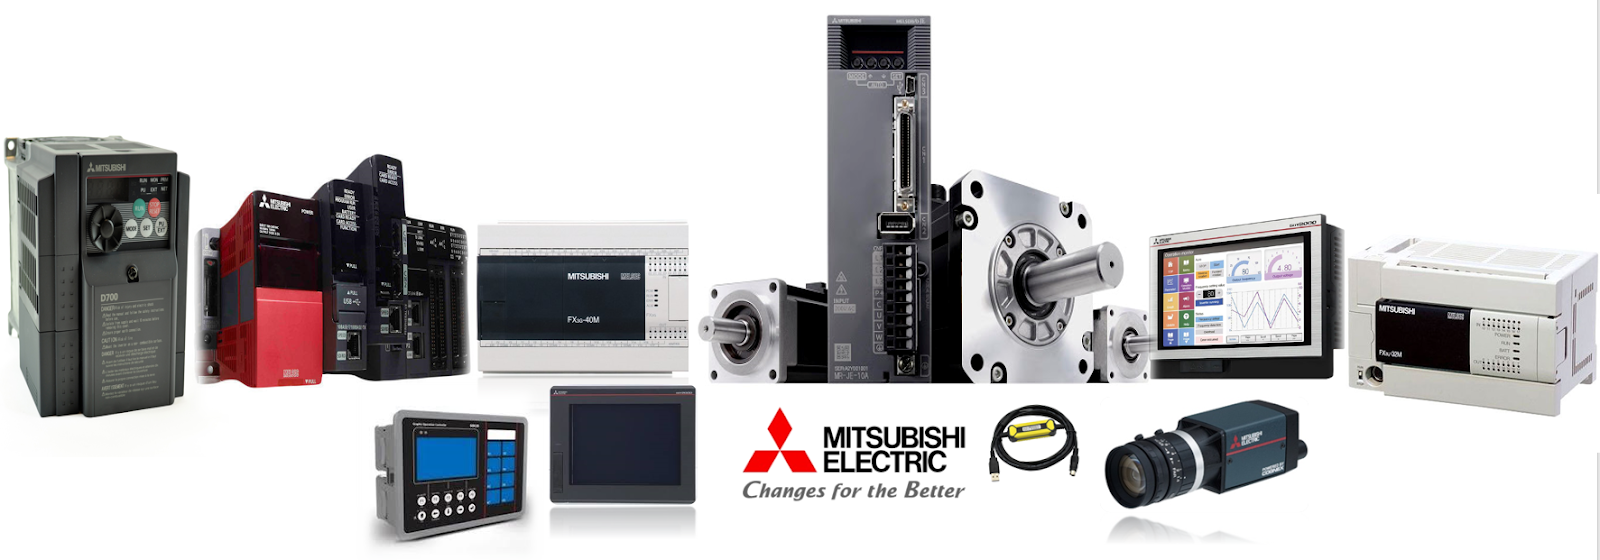 Mitsubishi Automation Solutions with Best Price and Services